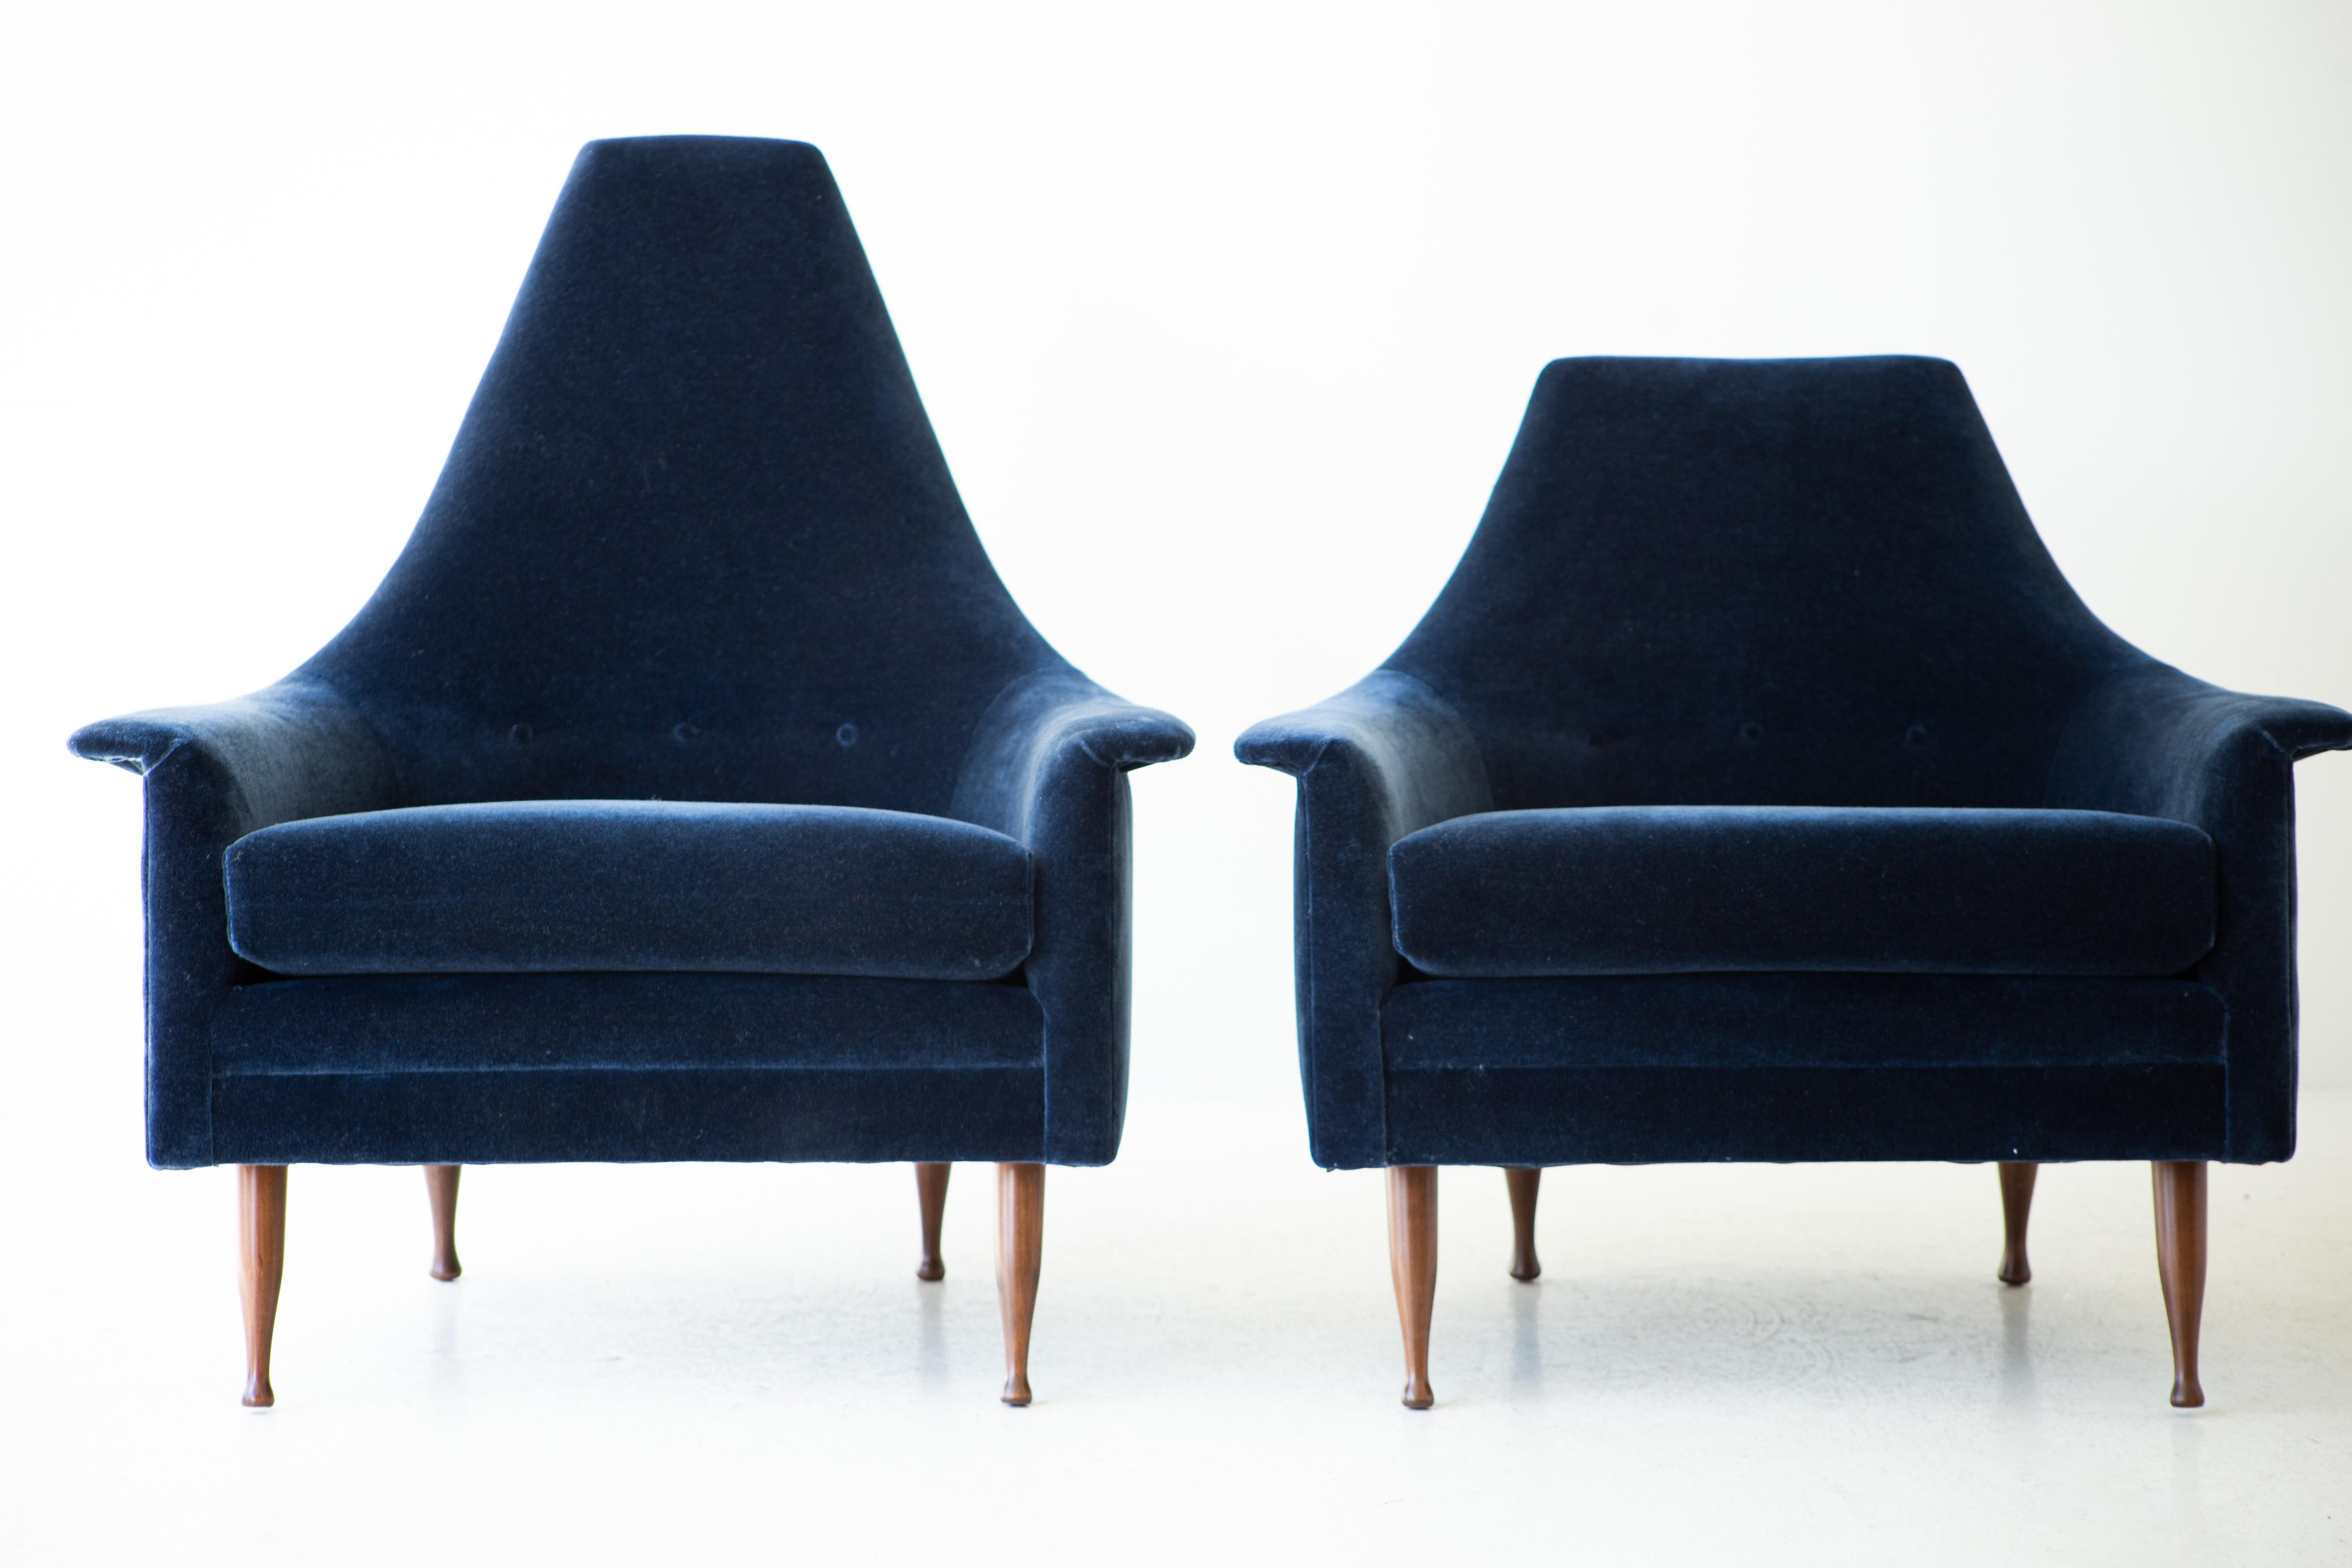 Designer: Unknown (executed under creative director Finn Anderson). 

Manufacturer: Selig Manufacturing. 
Period/Model: Mid-Century Modern. 
Specs: Walnut, Navy Mohair. 

Condition: 

These mid century high back and Low back lounge chairs